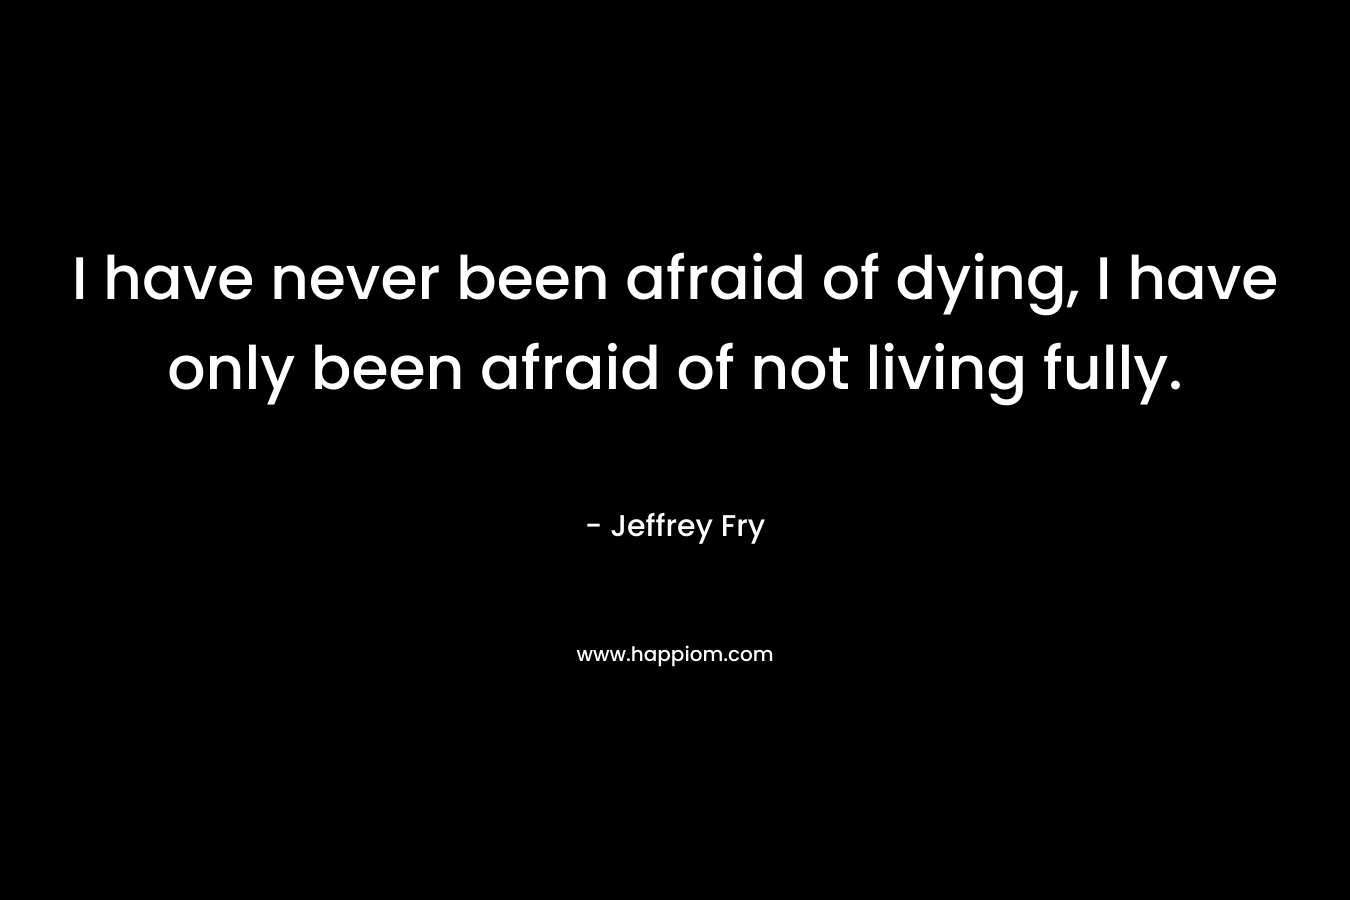 I have never been afraid of dying, I have only been afraid of not living fully. – Jeffrey Fry